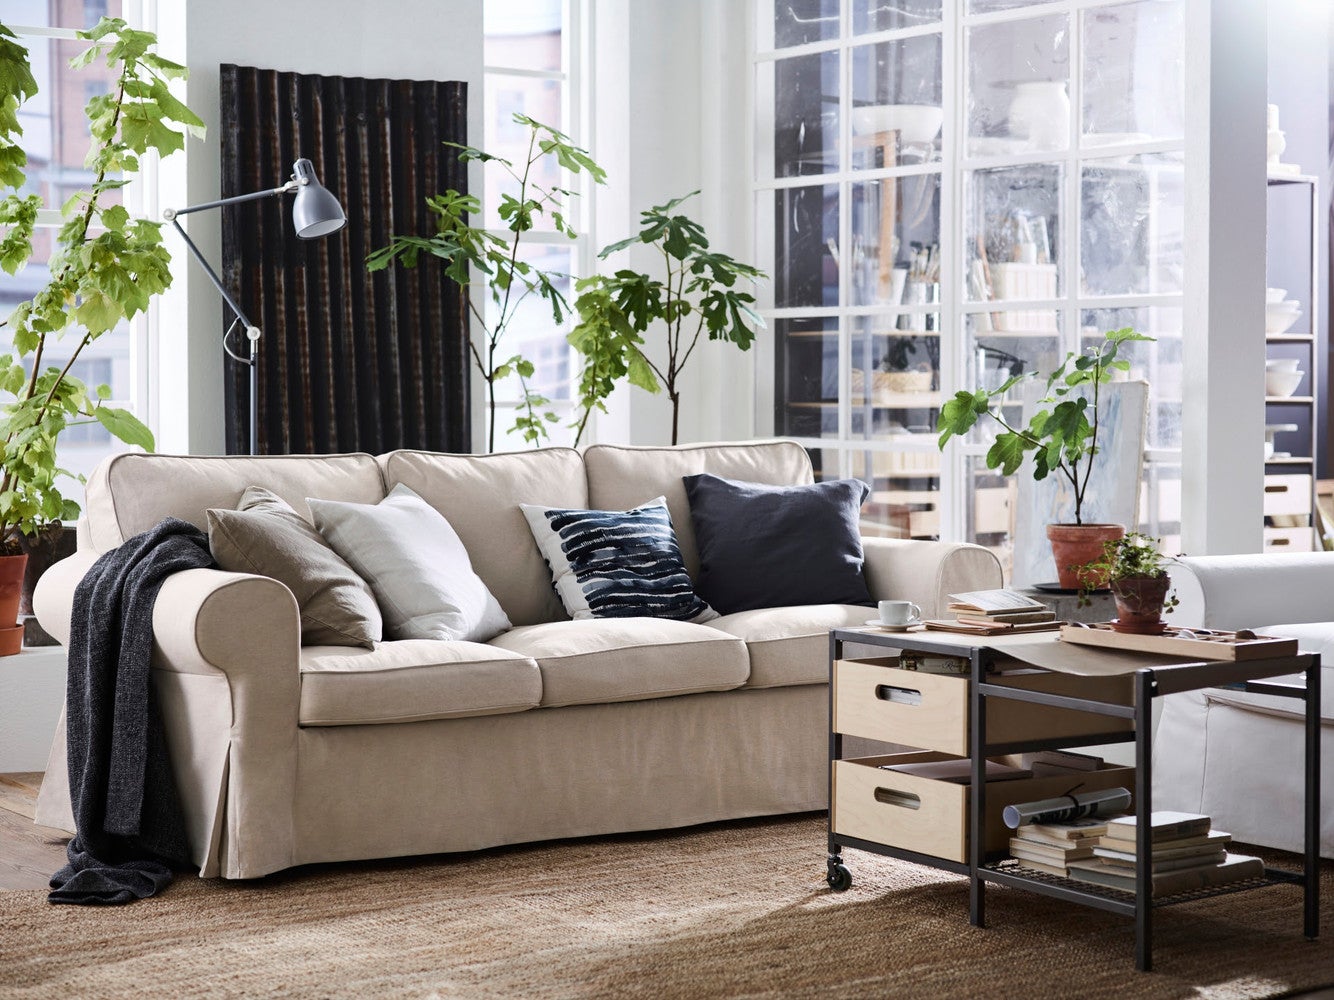 This Ikea Sofa Sale Is Our Wildest Dreams Come True